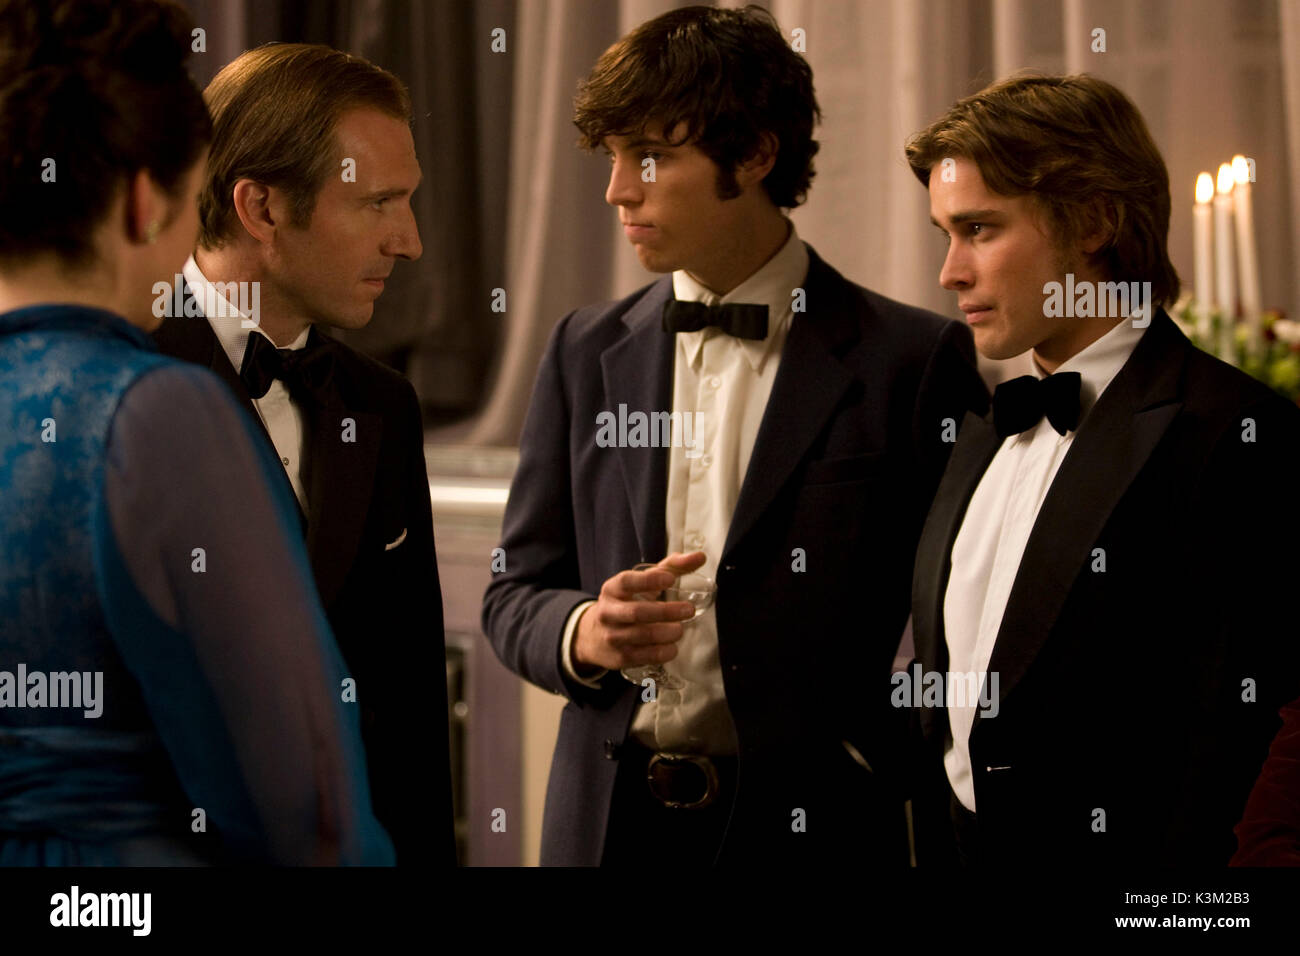 CEMETERY JUNCTION EMILY WATSON, RALPH FIENNES, TOM HUGHES, CHRISTIAN COOKE        Date: 2010 Stock Photo